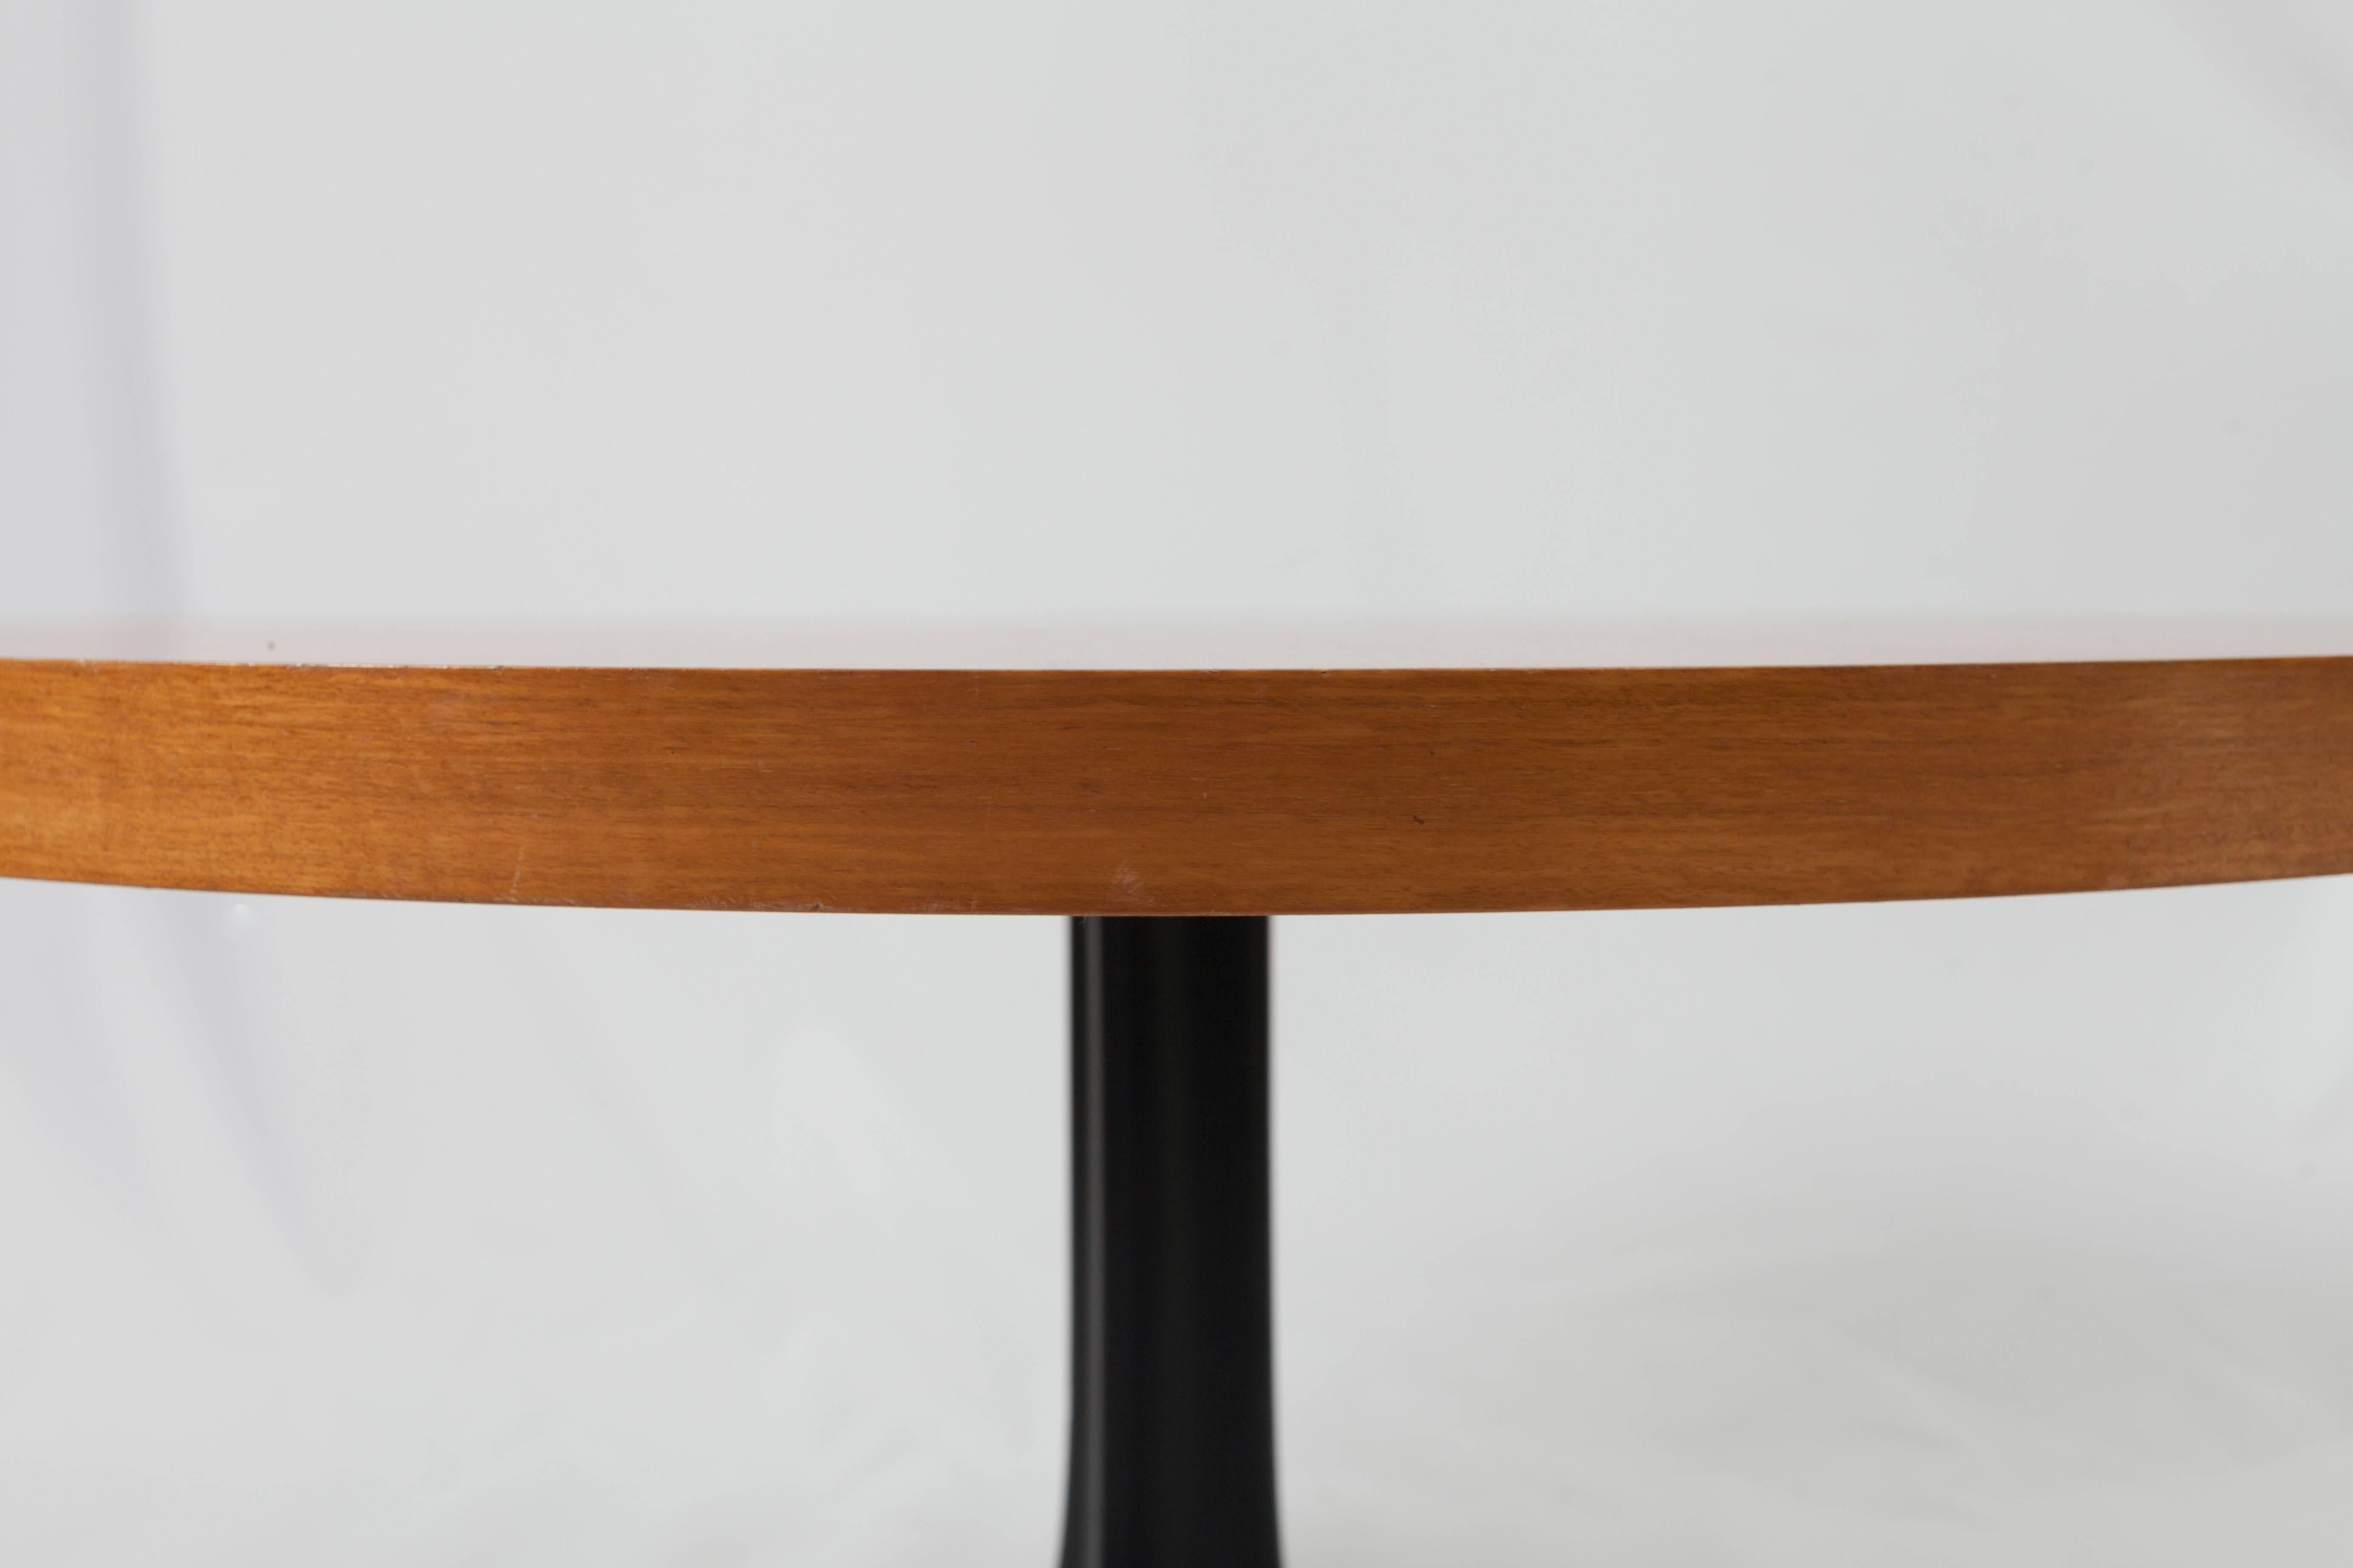 German Adjustable Dining Table/Coffee Table made of plastic and wood by Ilse Möbler